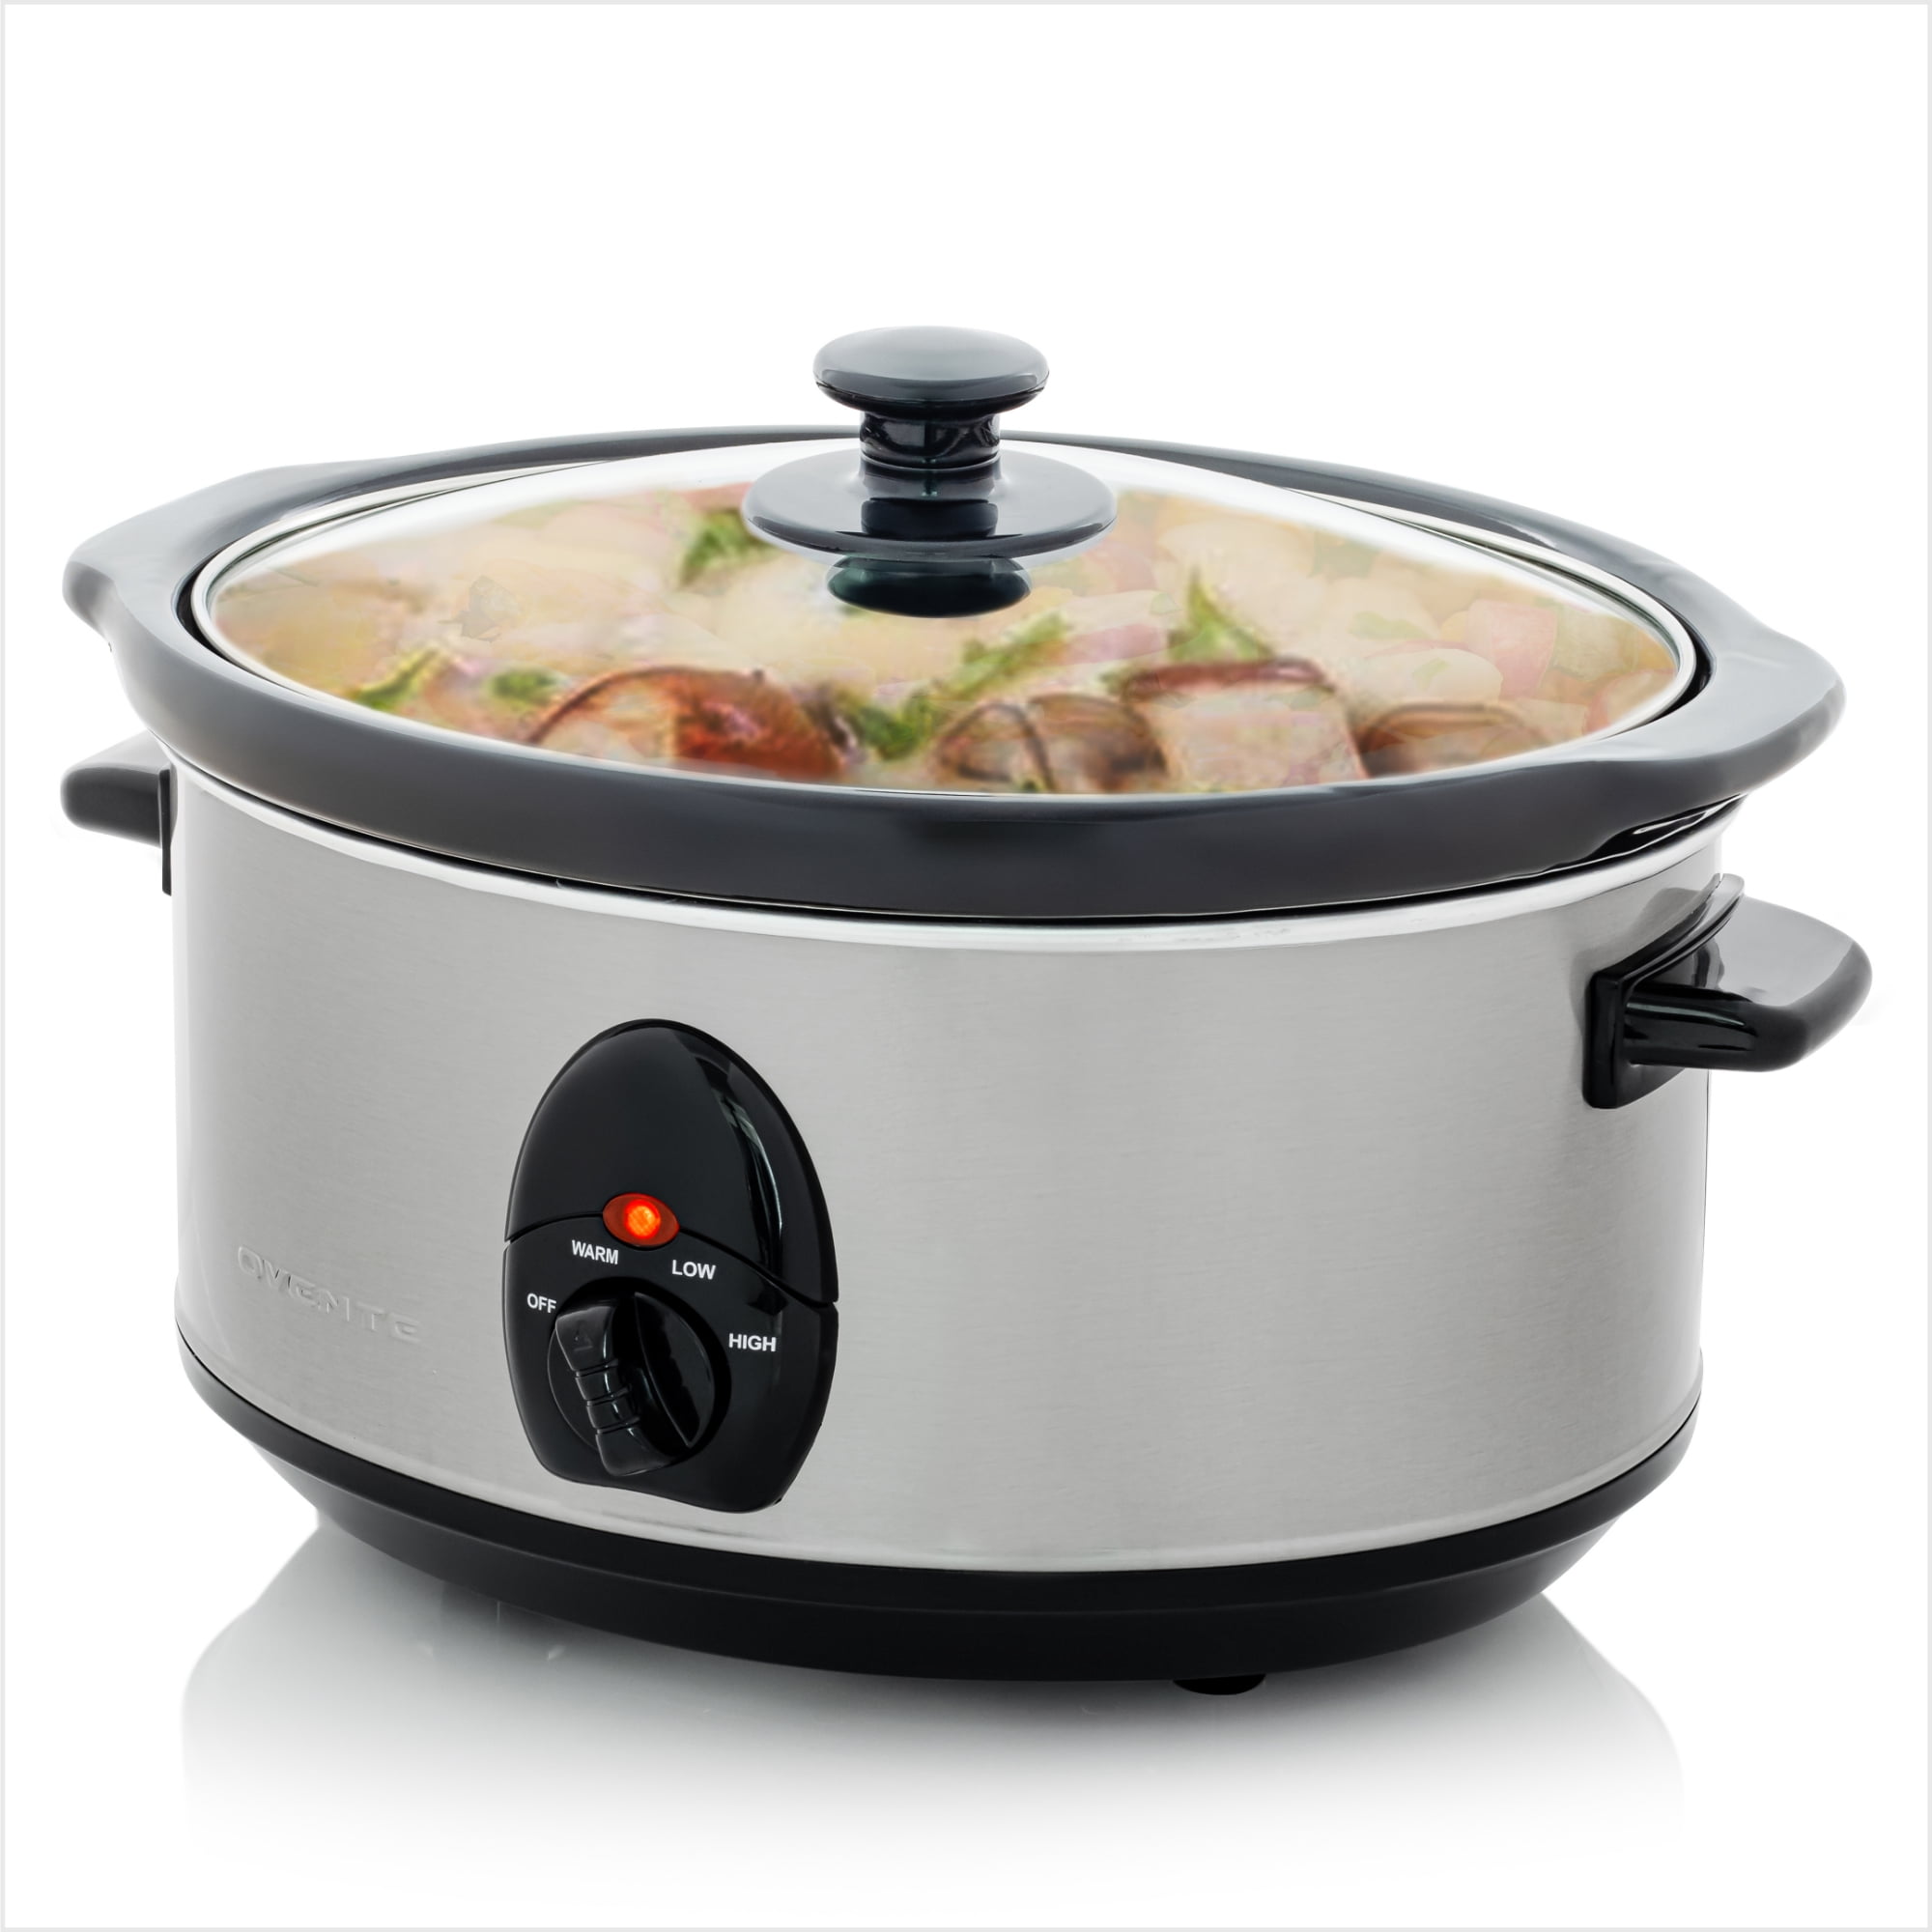 Slow Cooker with Removable Ceramic Pot, 3.5 Litre, Cotton White Cooking  accessories Ollas arroceras eléctricas Food warmers Lar - AliExpress